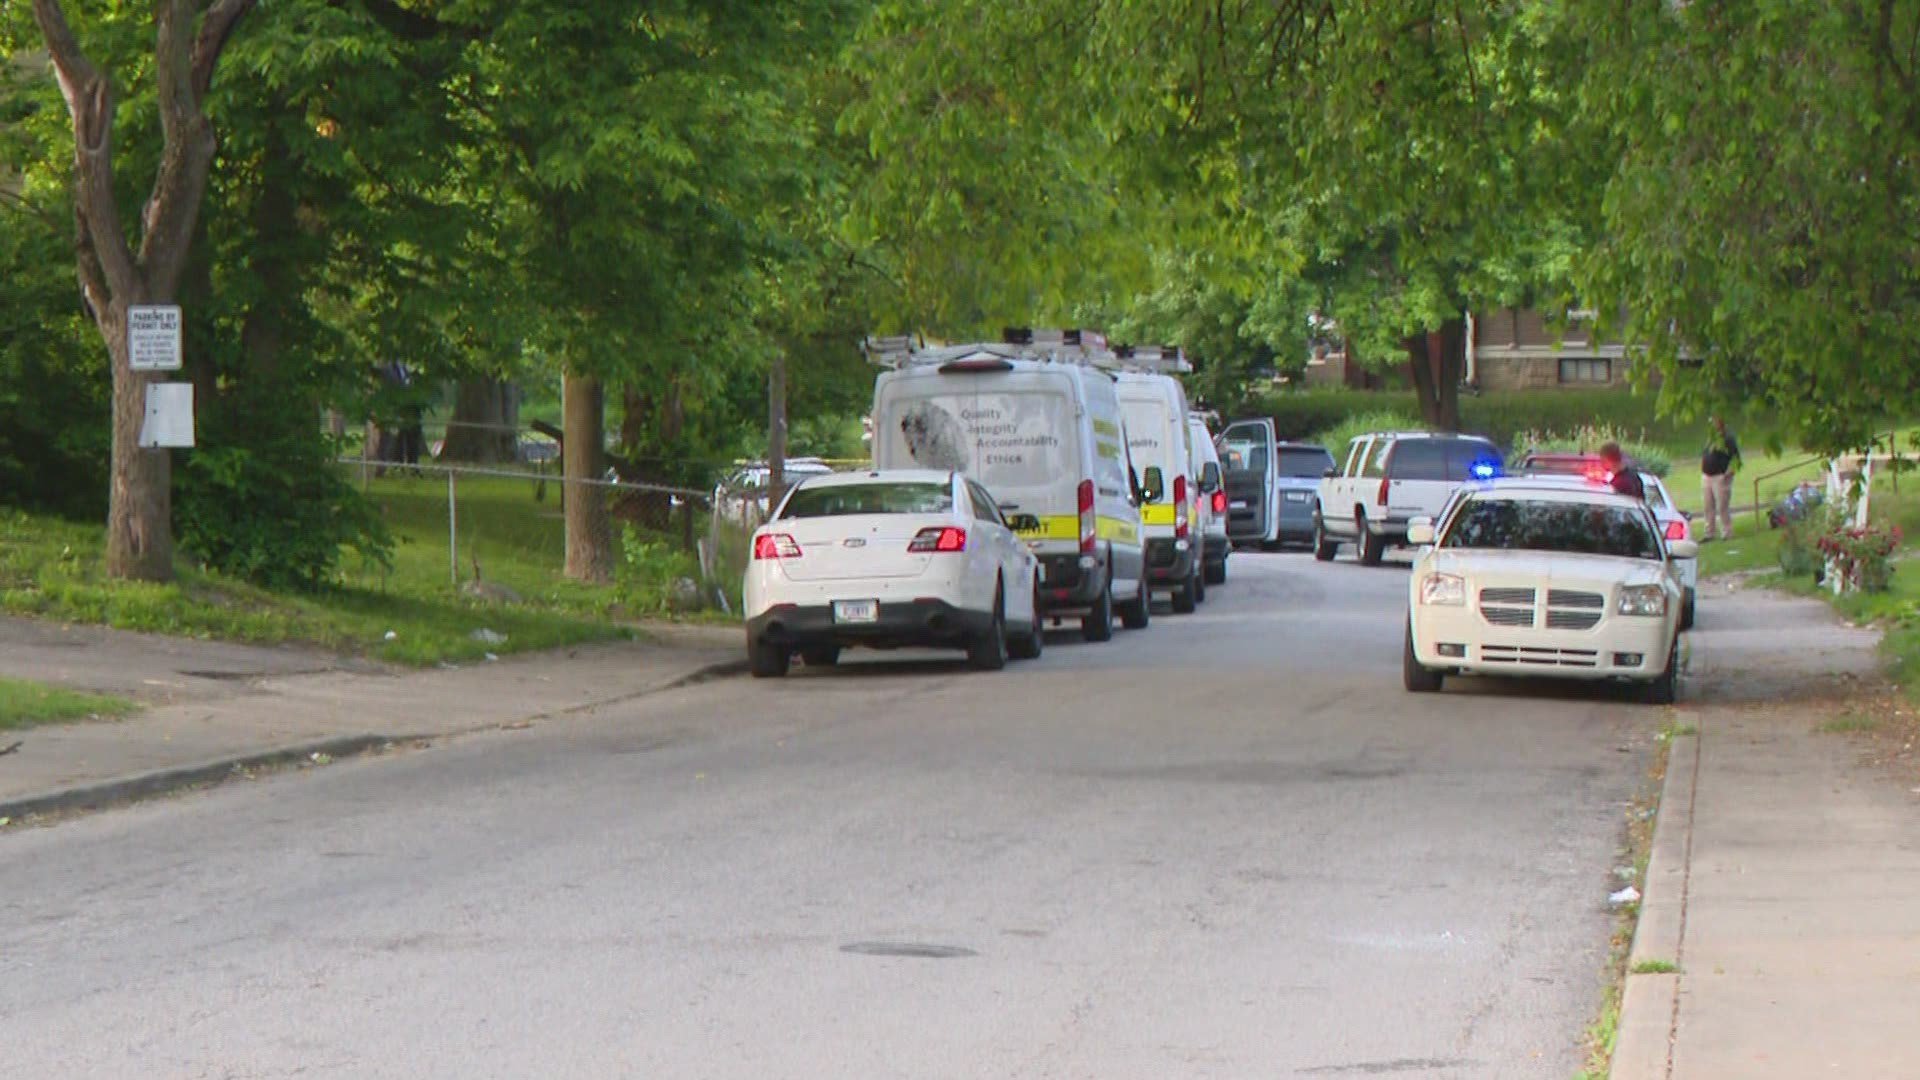 No officers were injured in a Monday morning shooting on Indy's east side.